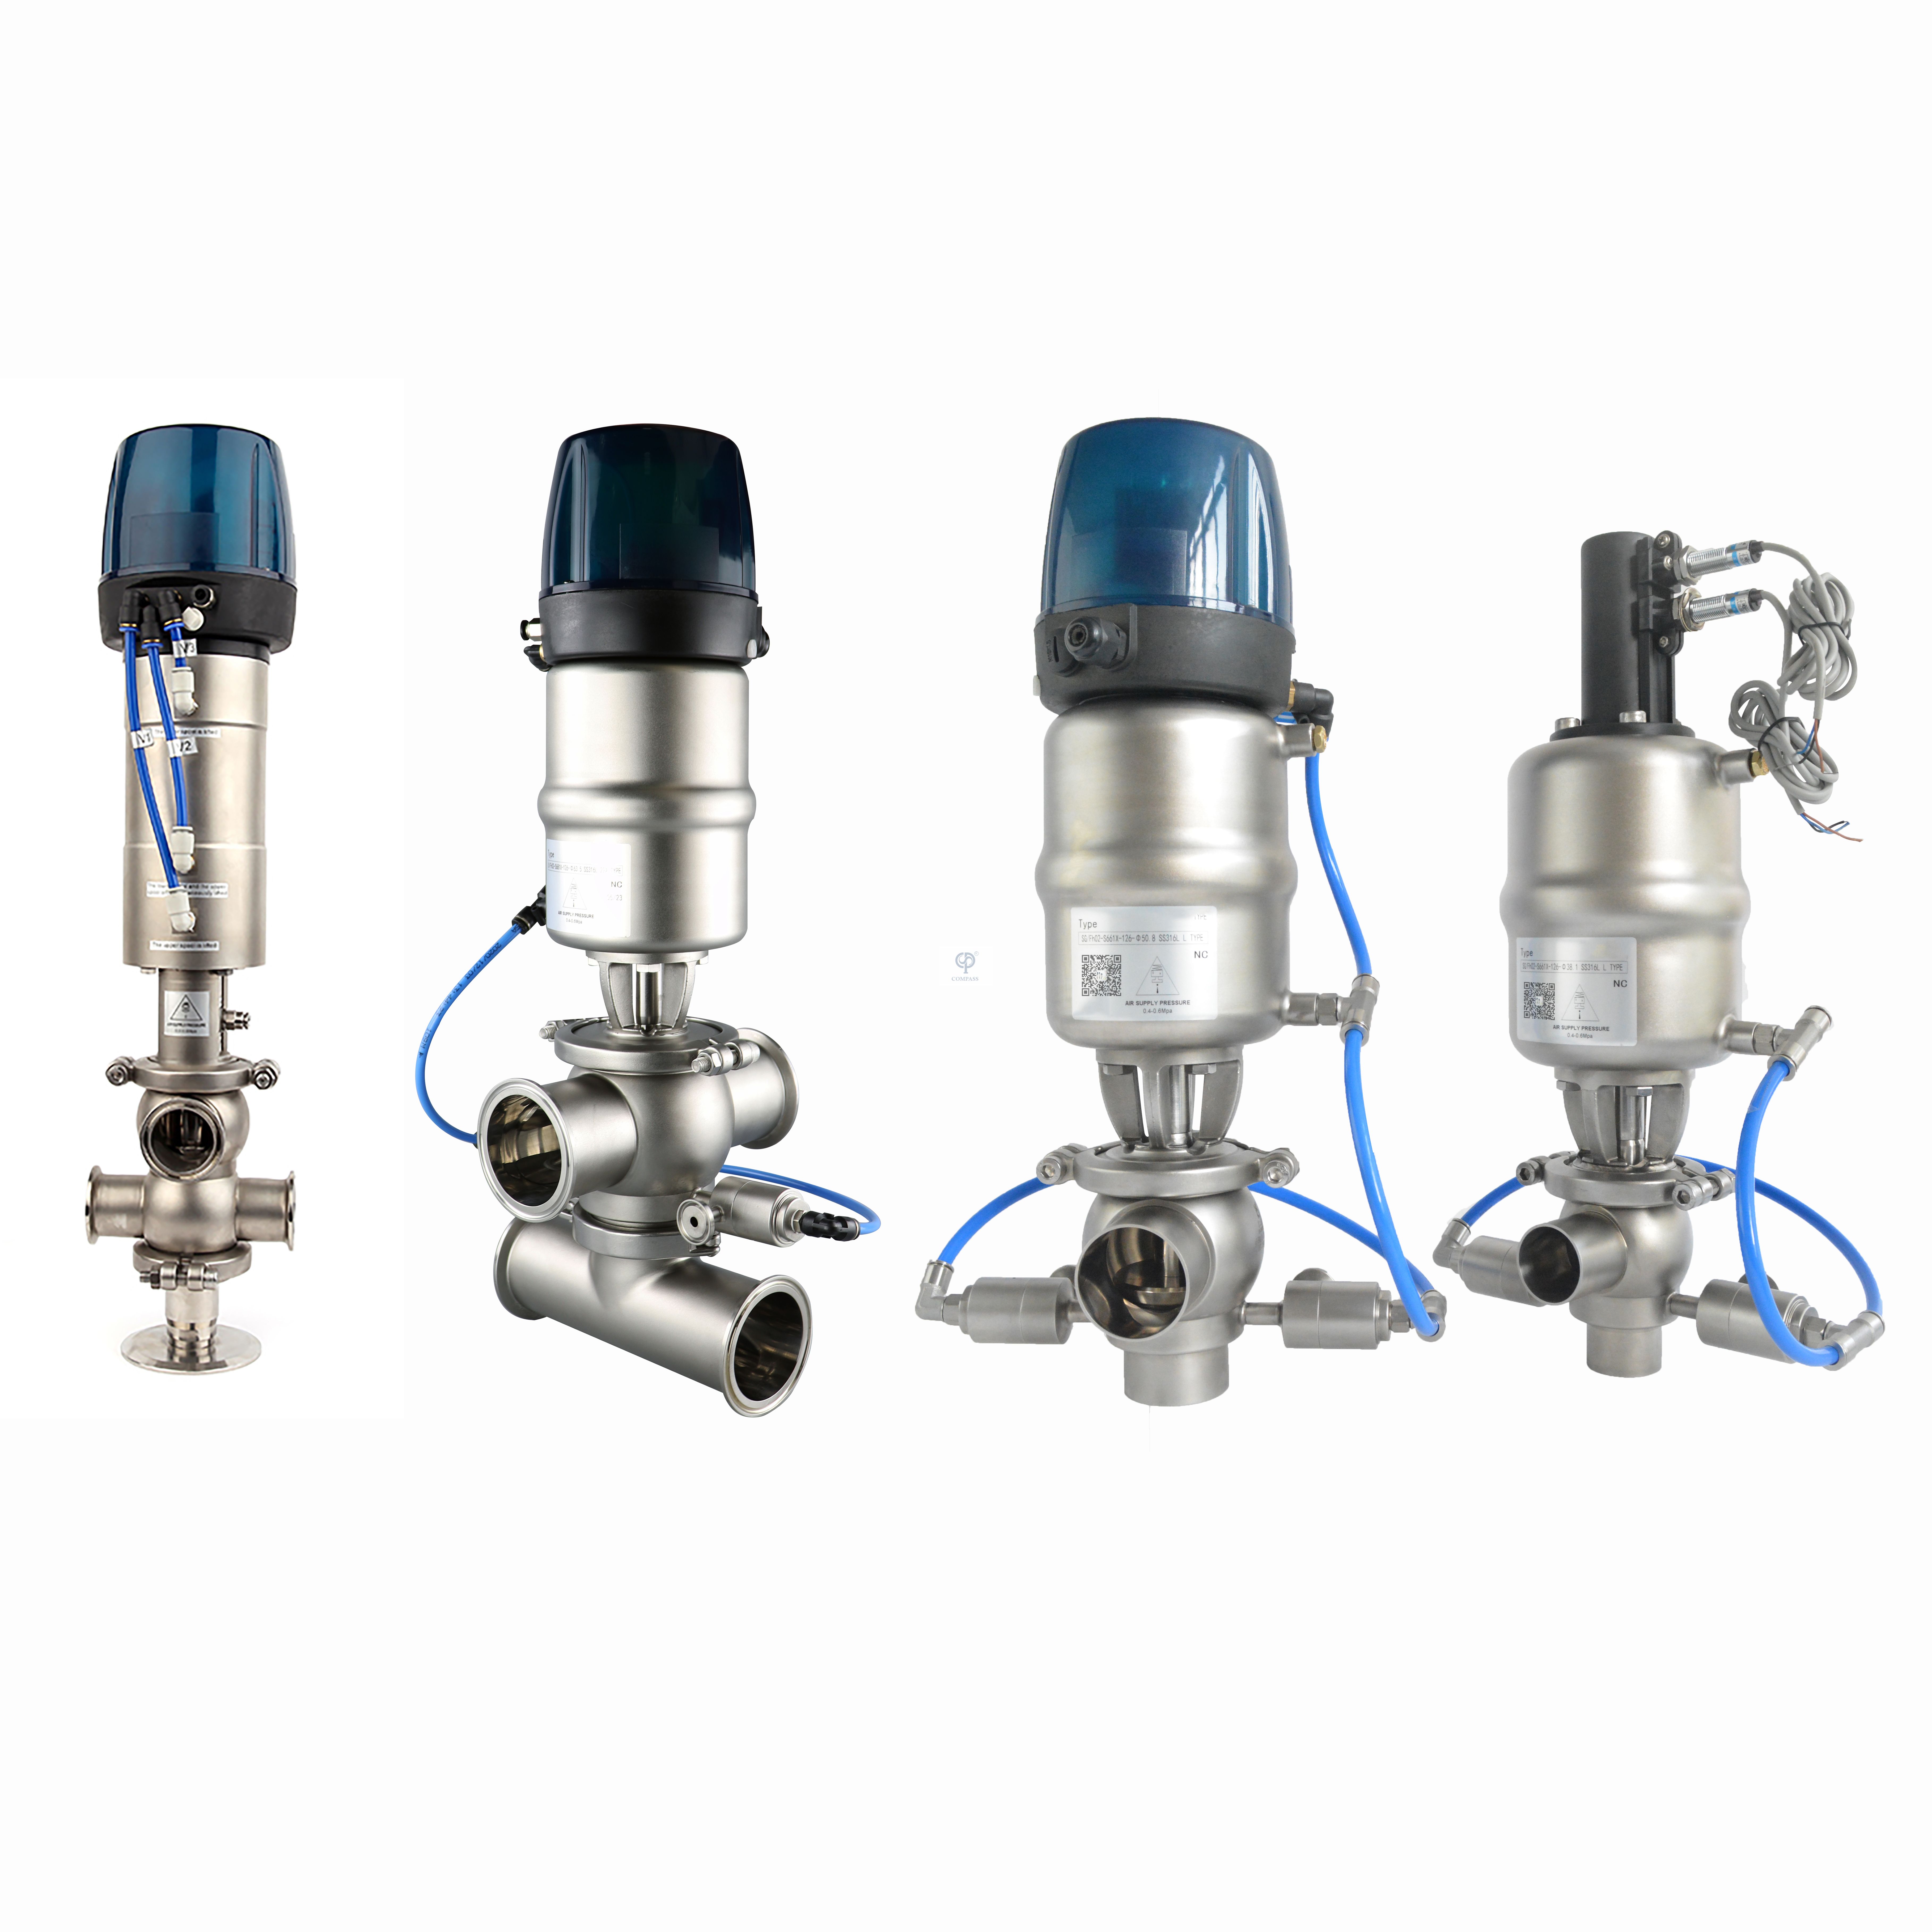 FH02 Single Seat Double Seal Four Ways Anti Saniatry Mix-proof Mixproof Valve with Intelligent Pneumatic Outside Cleaning 